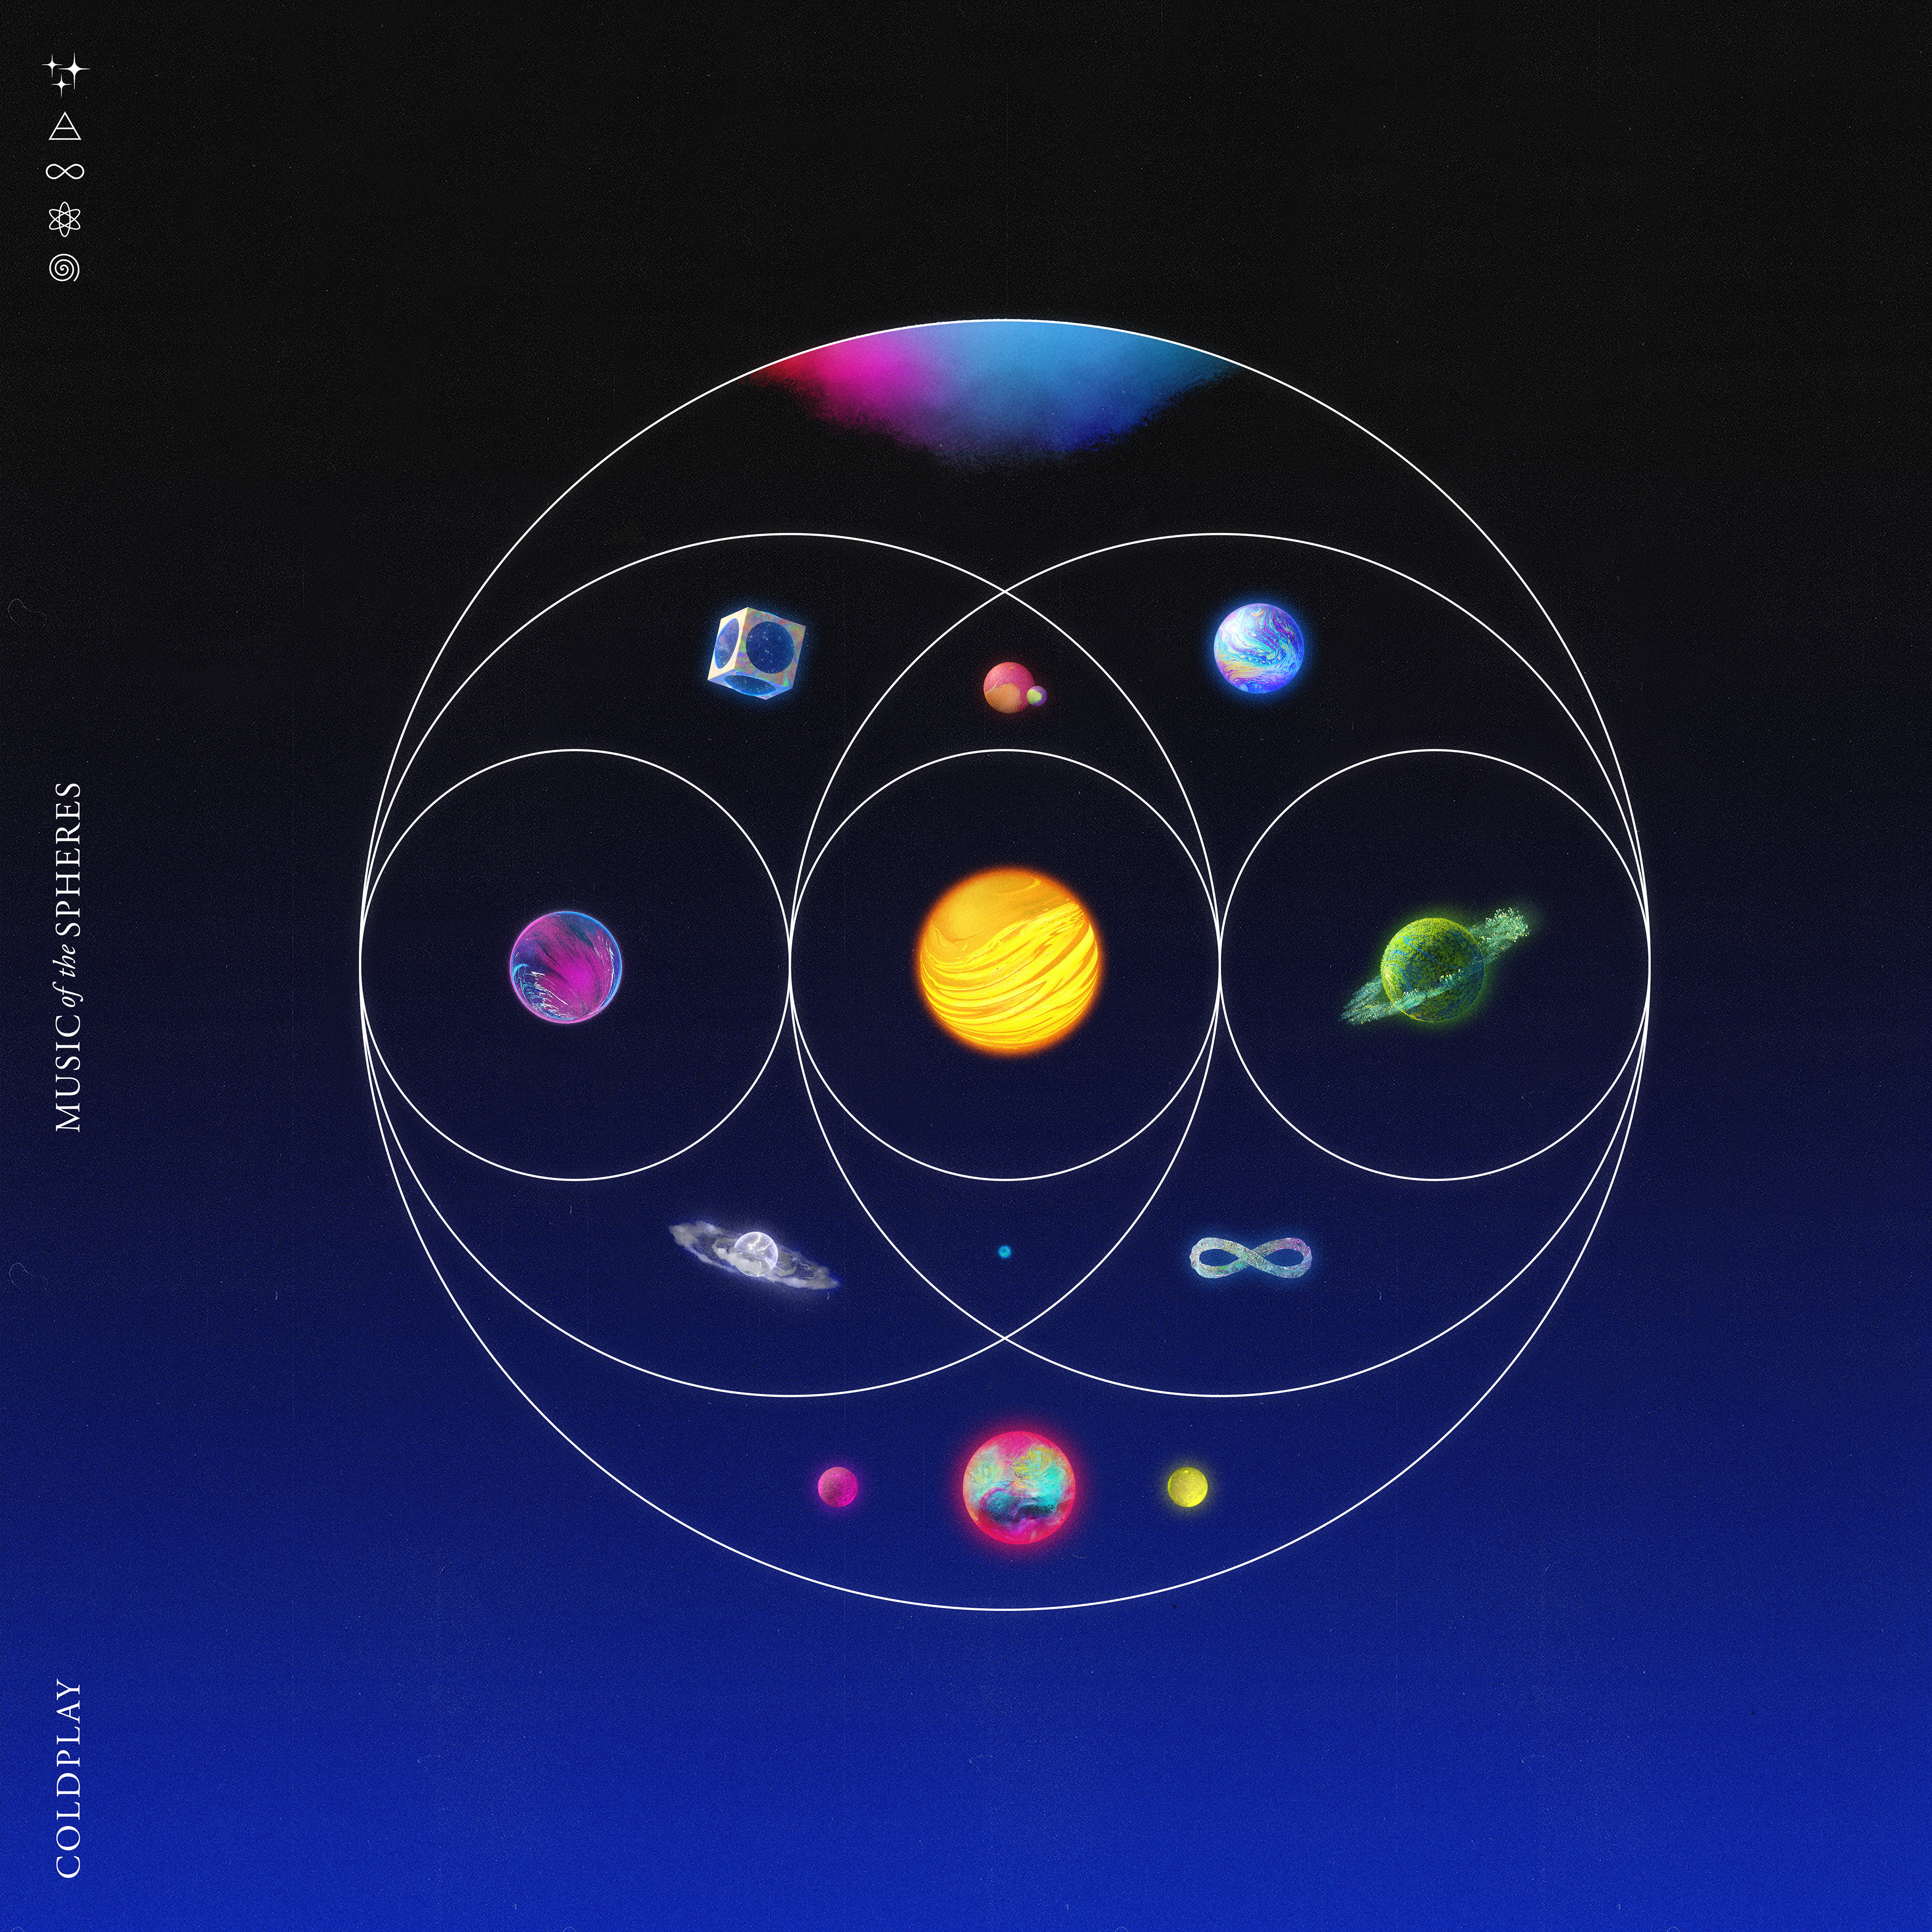 [Hi-Res/Flac][24bit/44.1khz] Music Of The Spheres – Coldplay